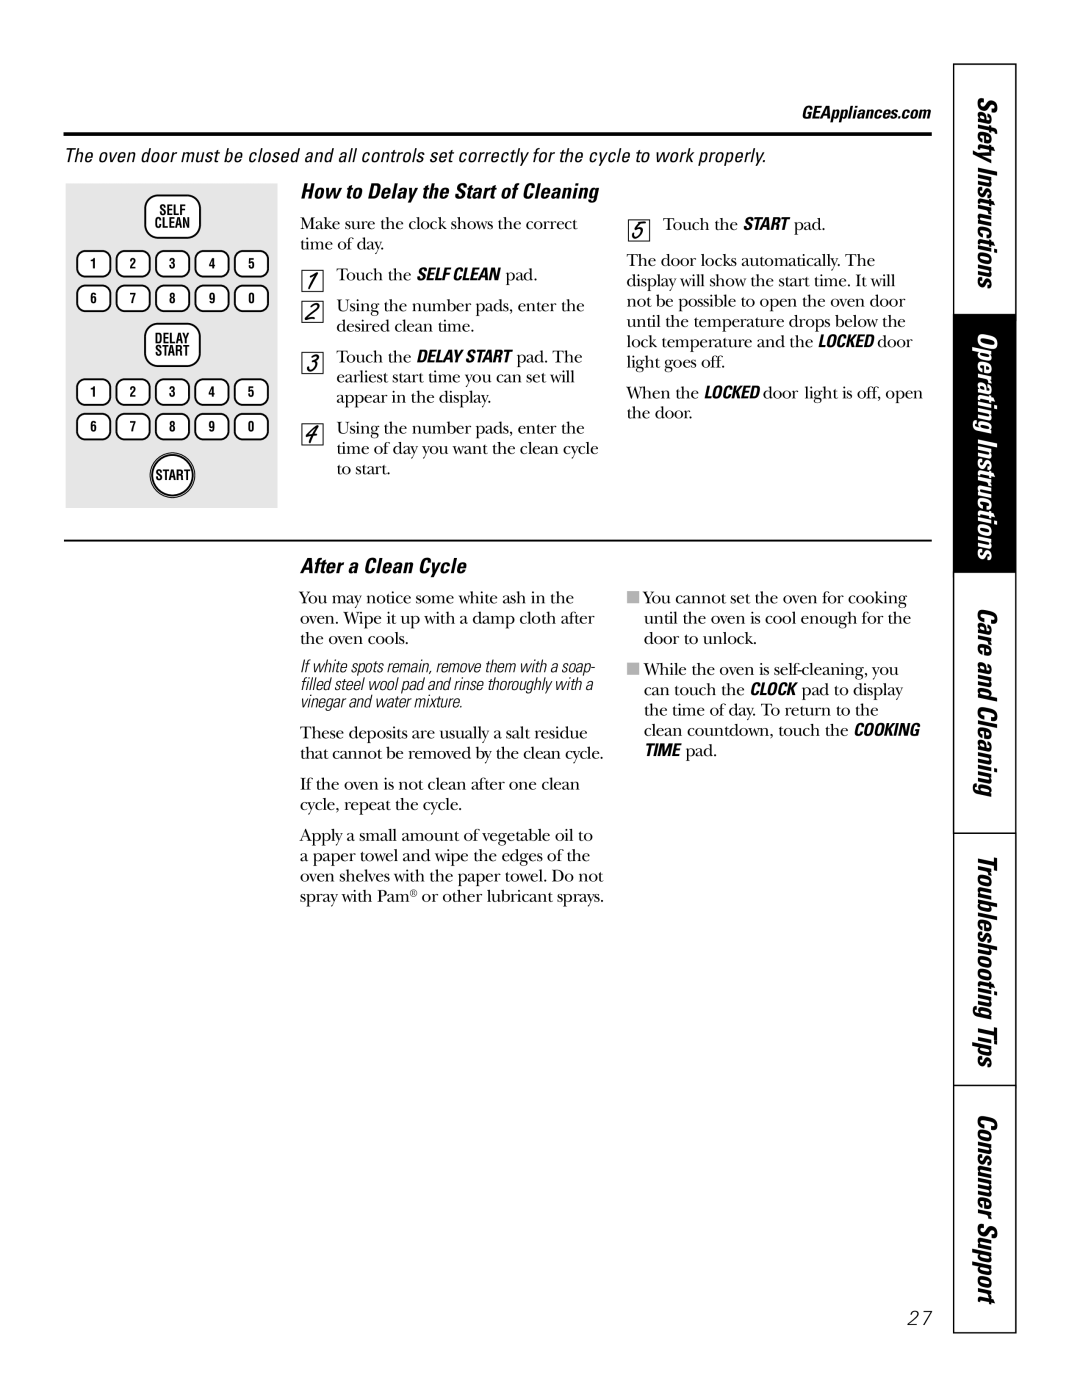 GE JBP84 owner manual Instructions Operating Instructions, After a Clean Cycle, How to Delay the Start of Cleaning, Safety 